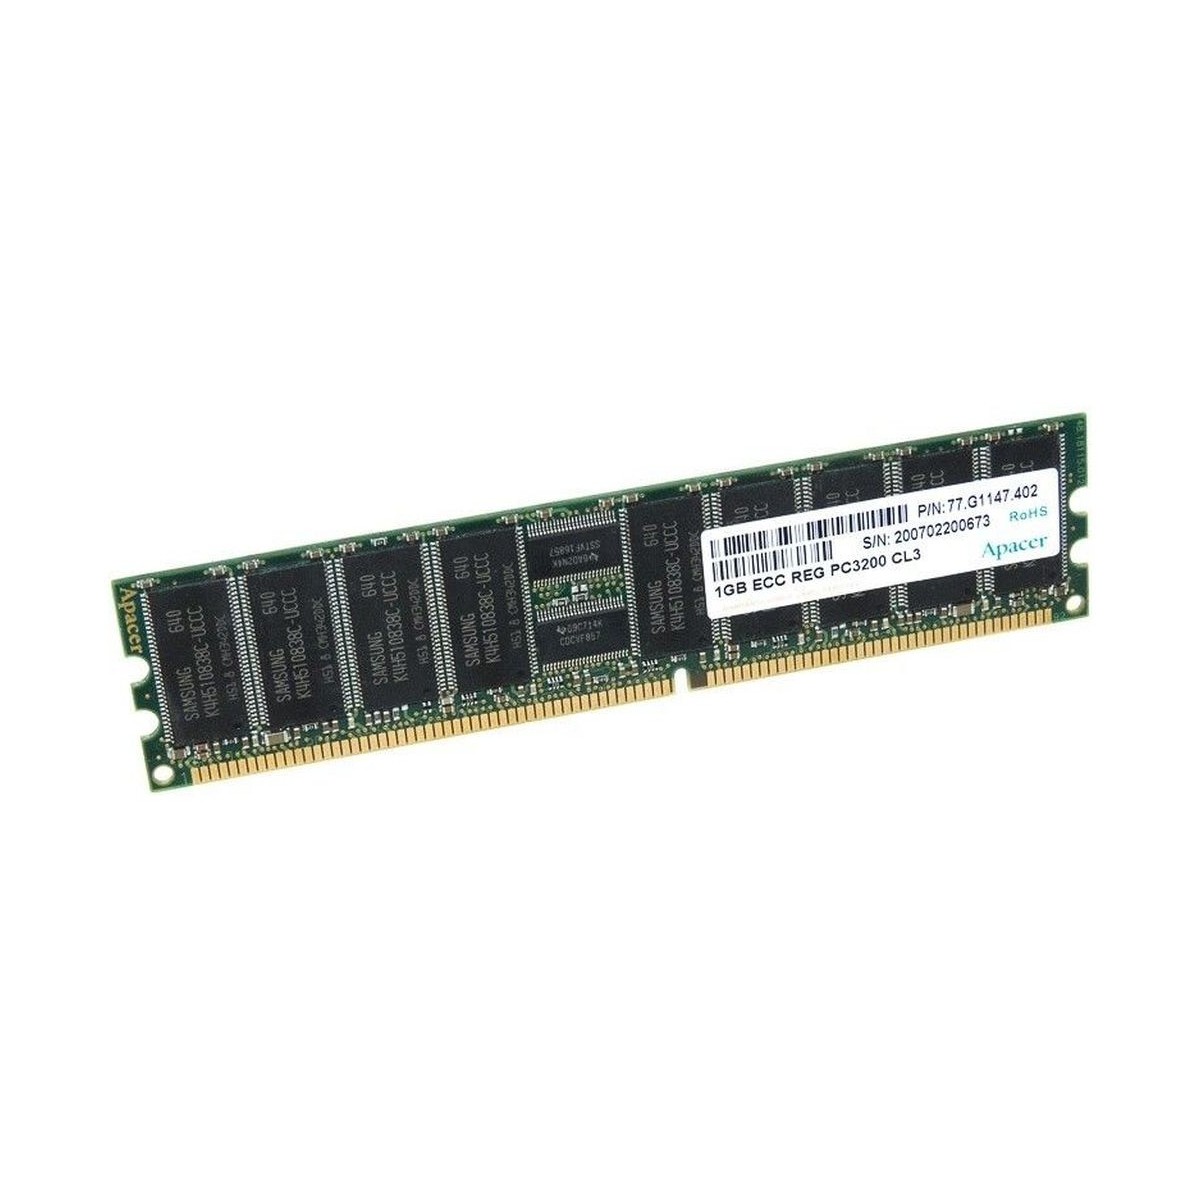 PAMIEC APACER 1GB 77.G1147.402 400MHZ DDR